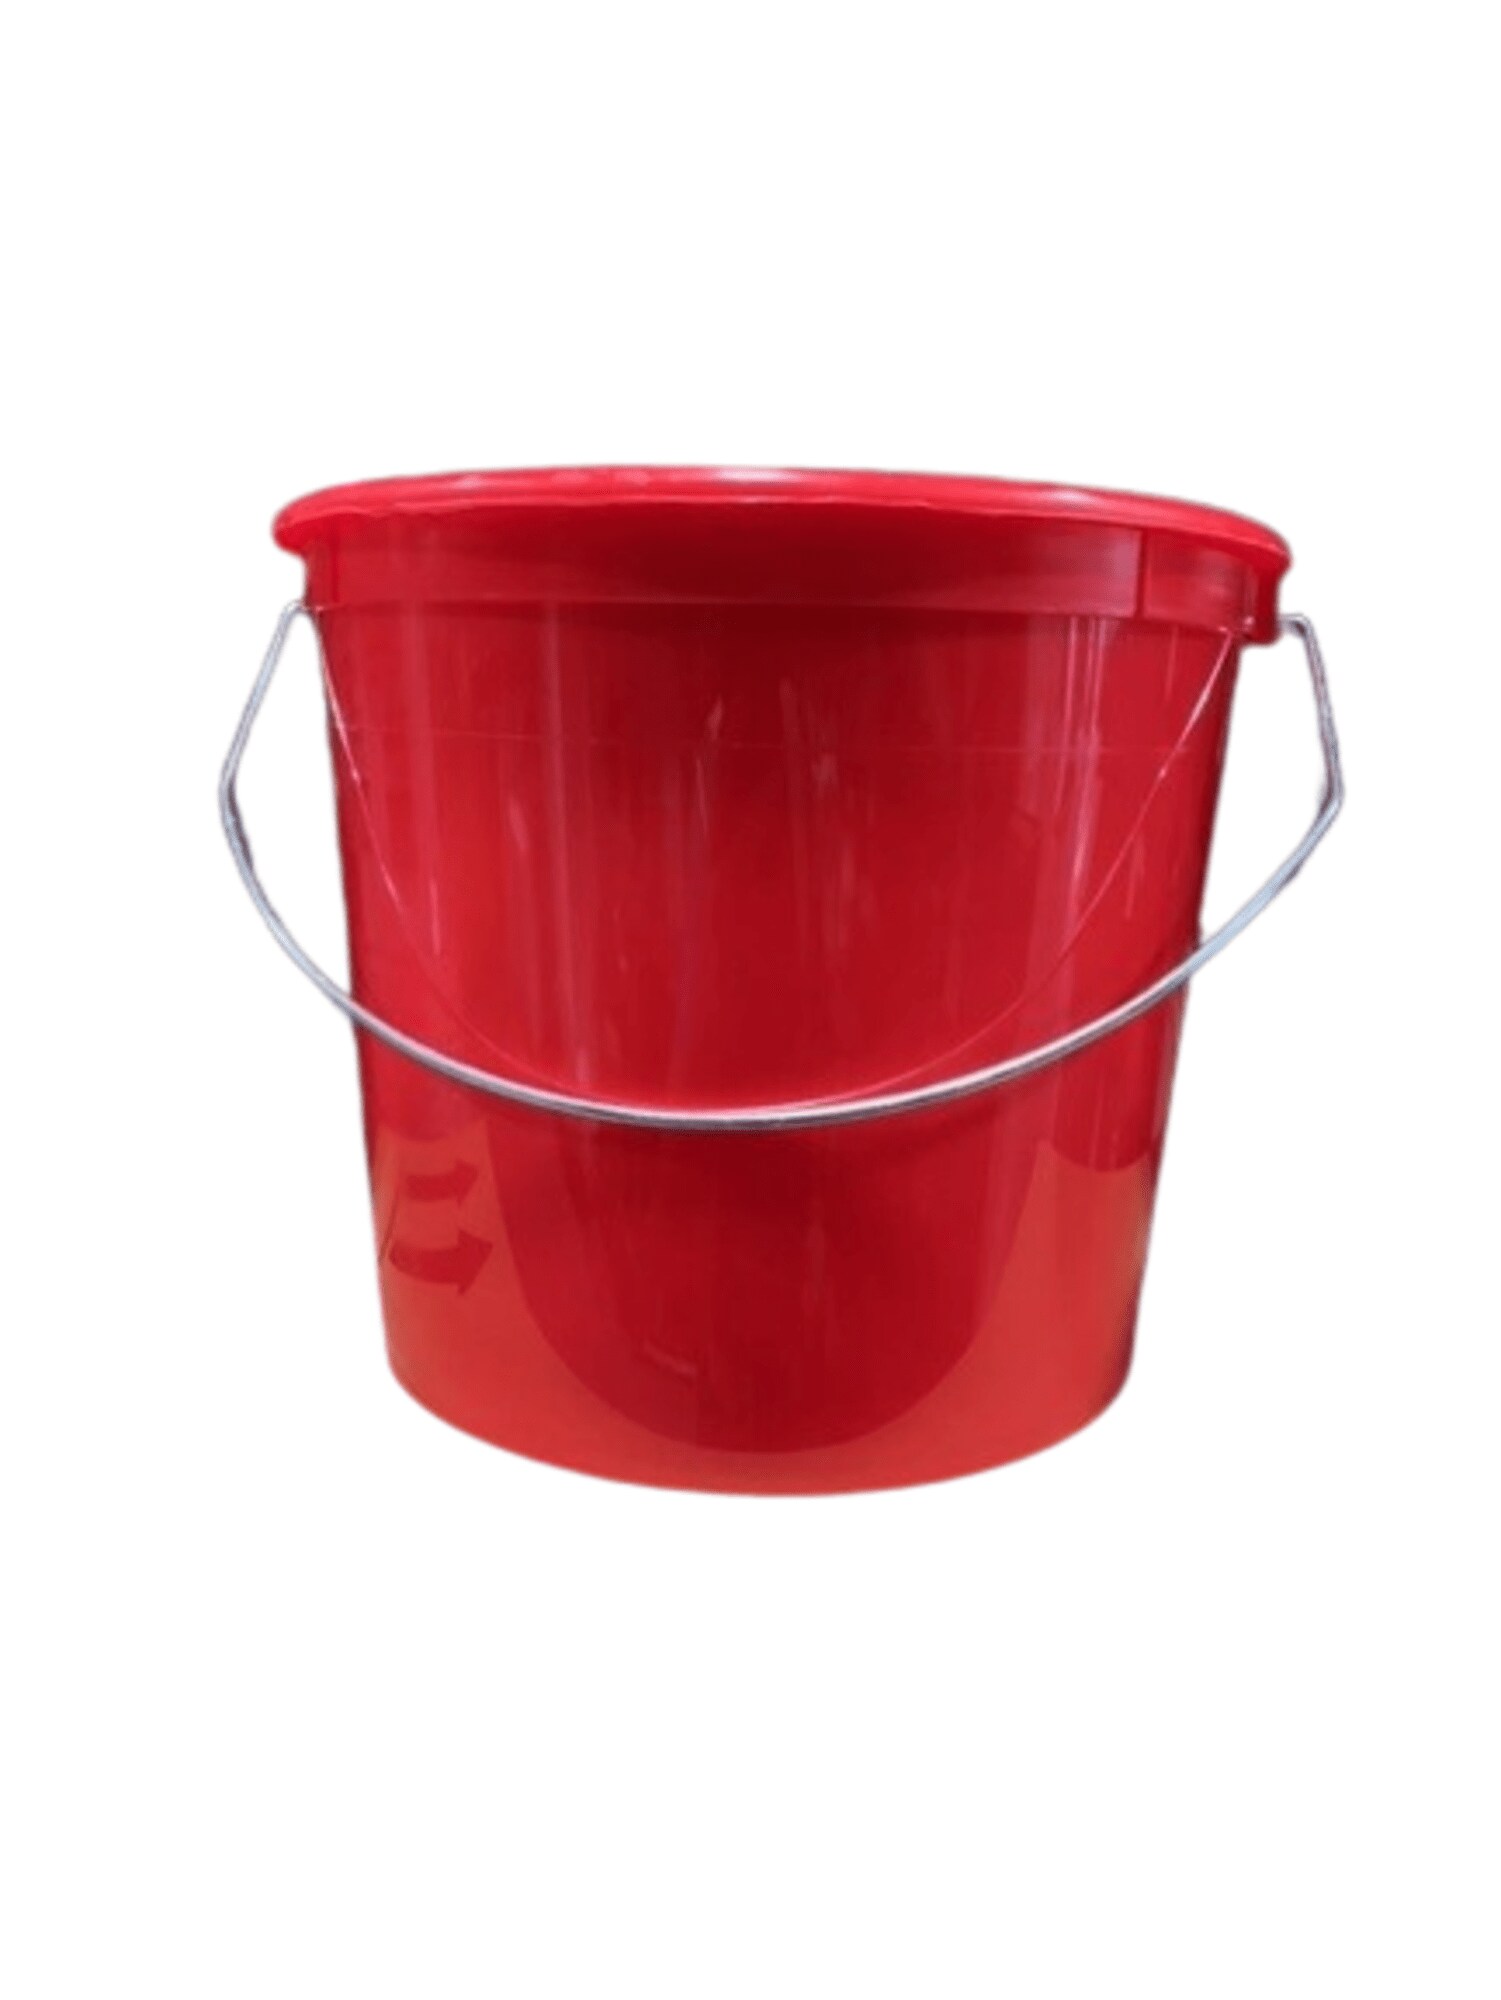 Leaktite Leaktite 55024 5 Qt Red Plastic Bucket w/ Steel Handle in the ...